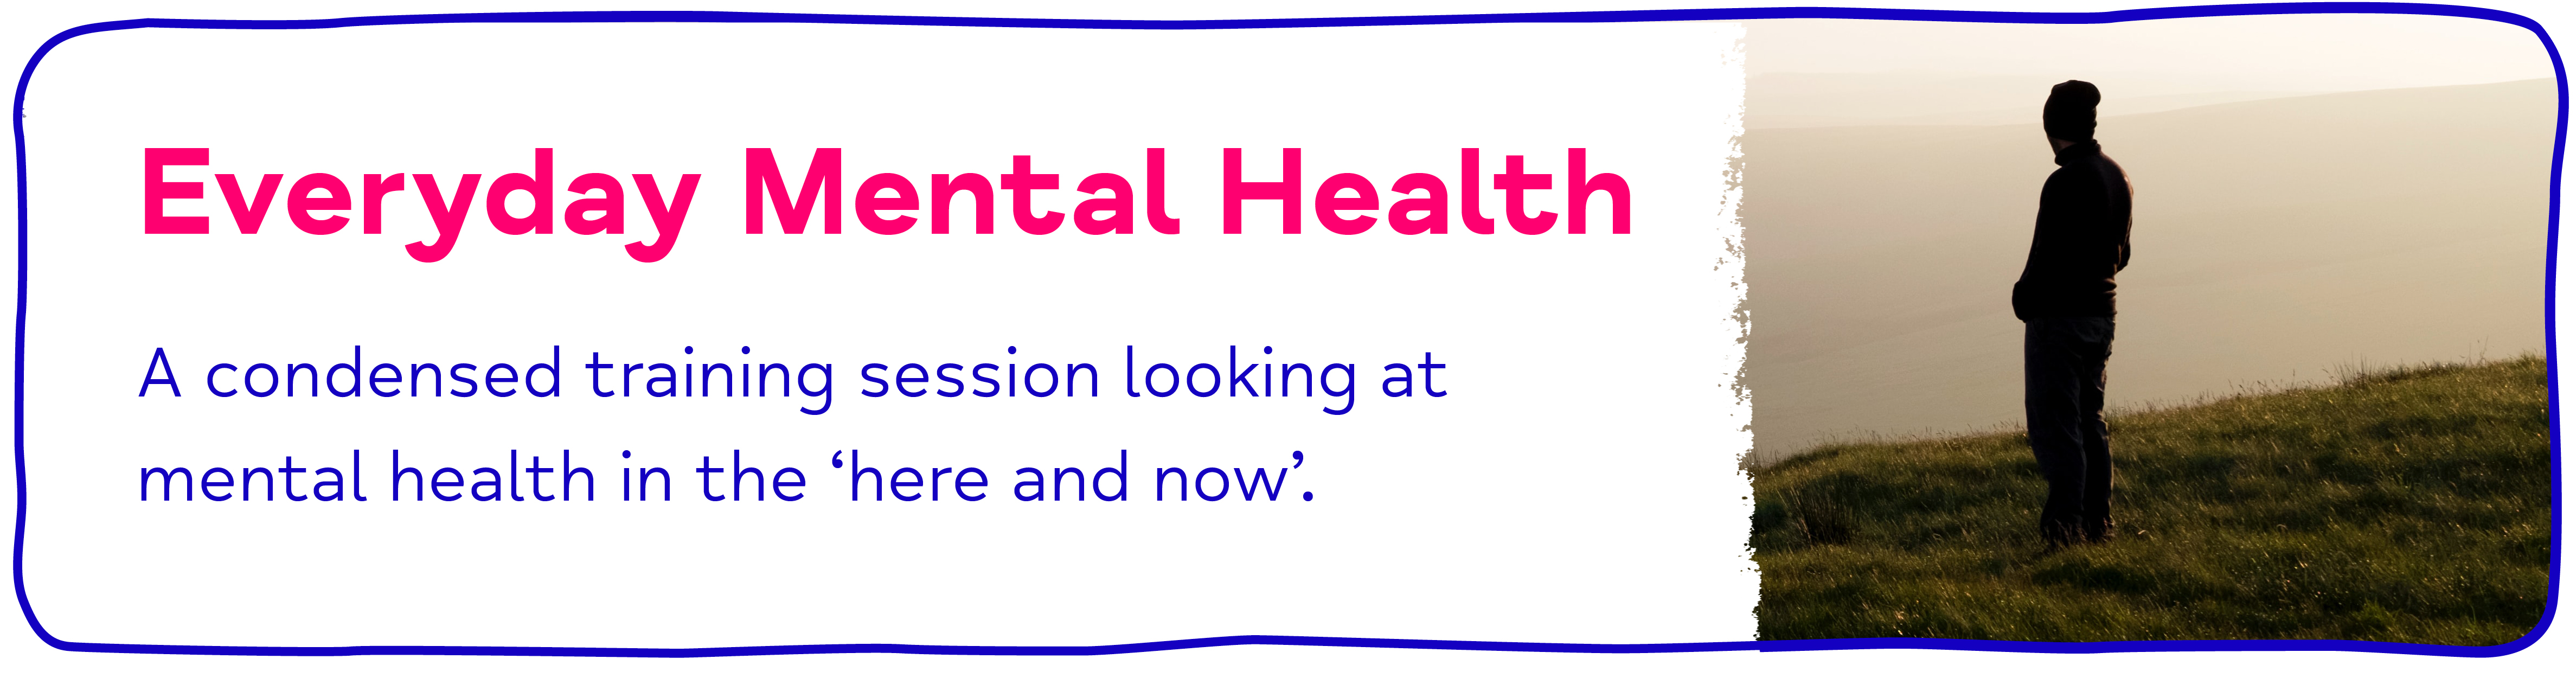 Everyday Mental Health. A condensed training session looking at mental health in the ‘here and now’.